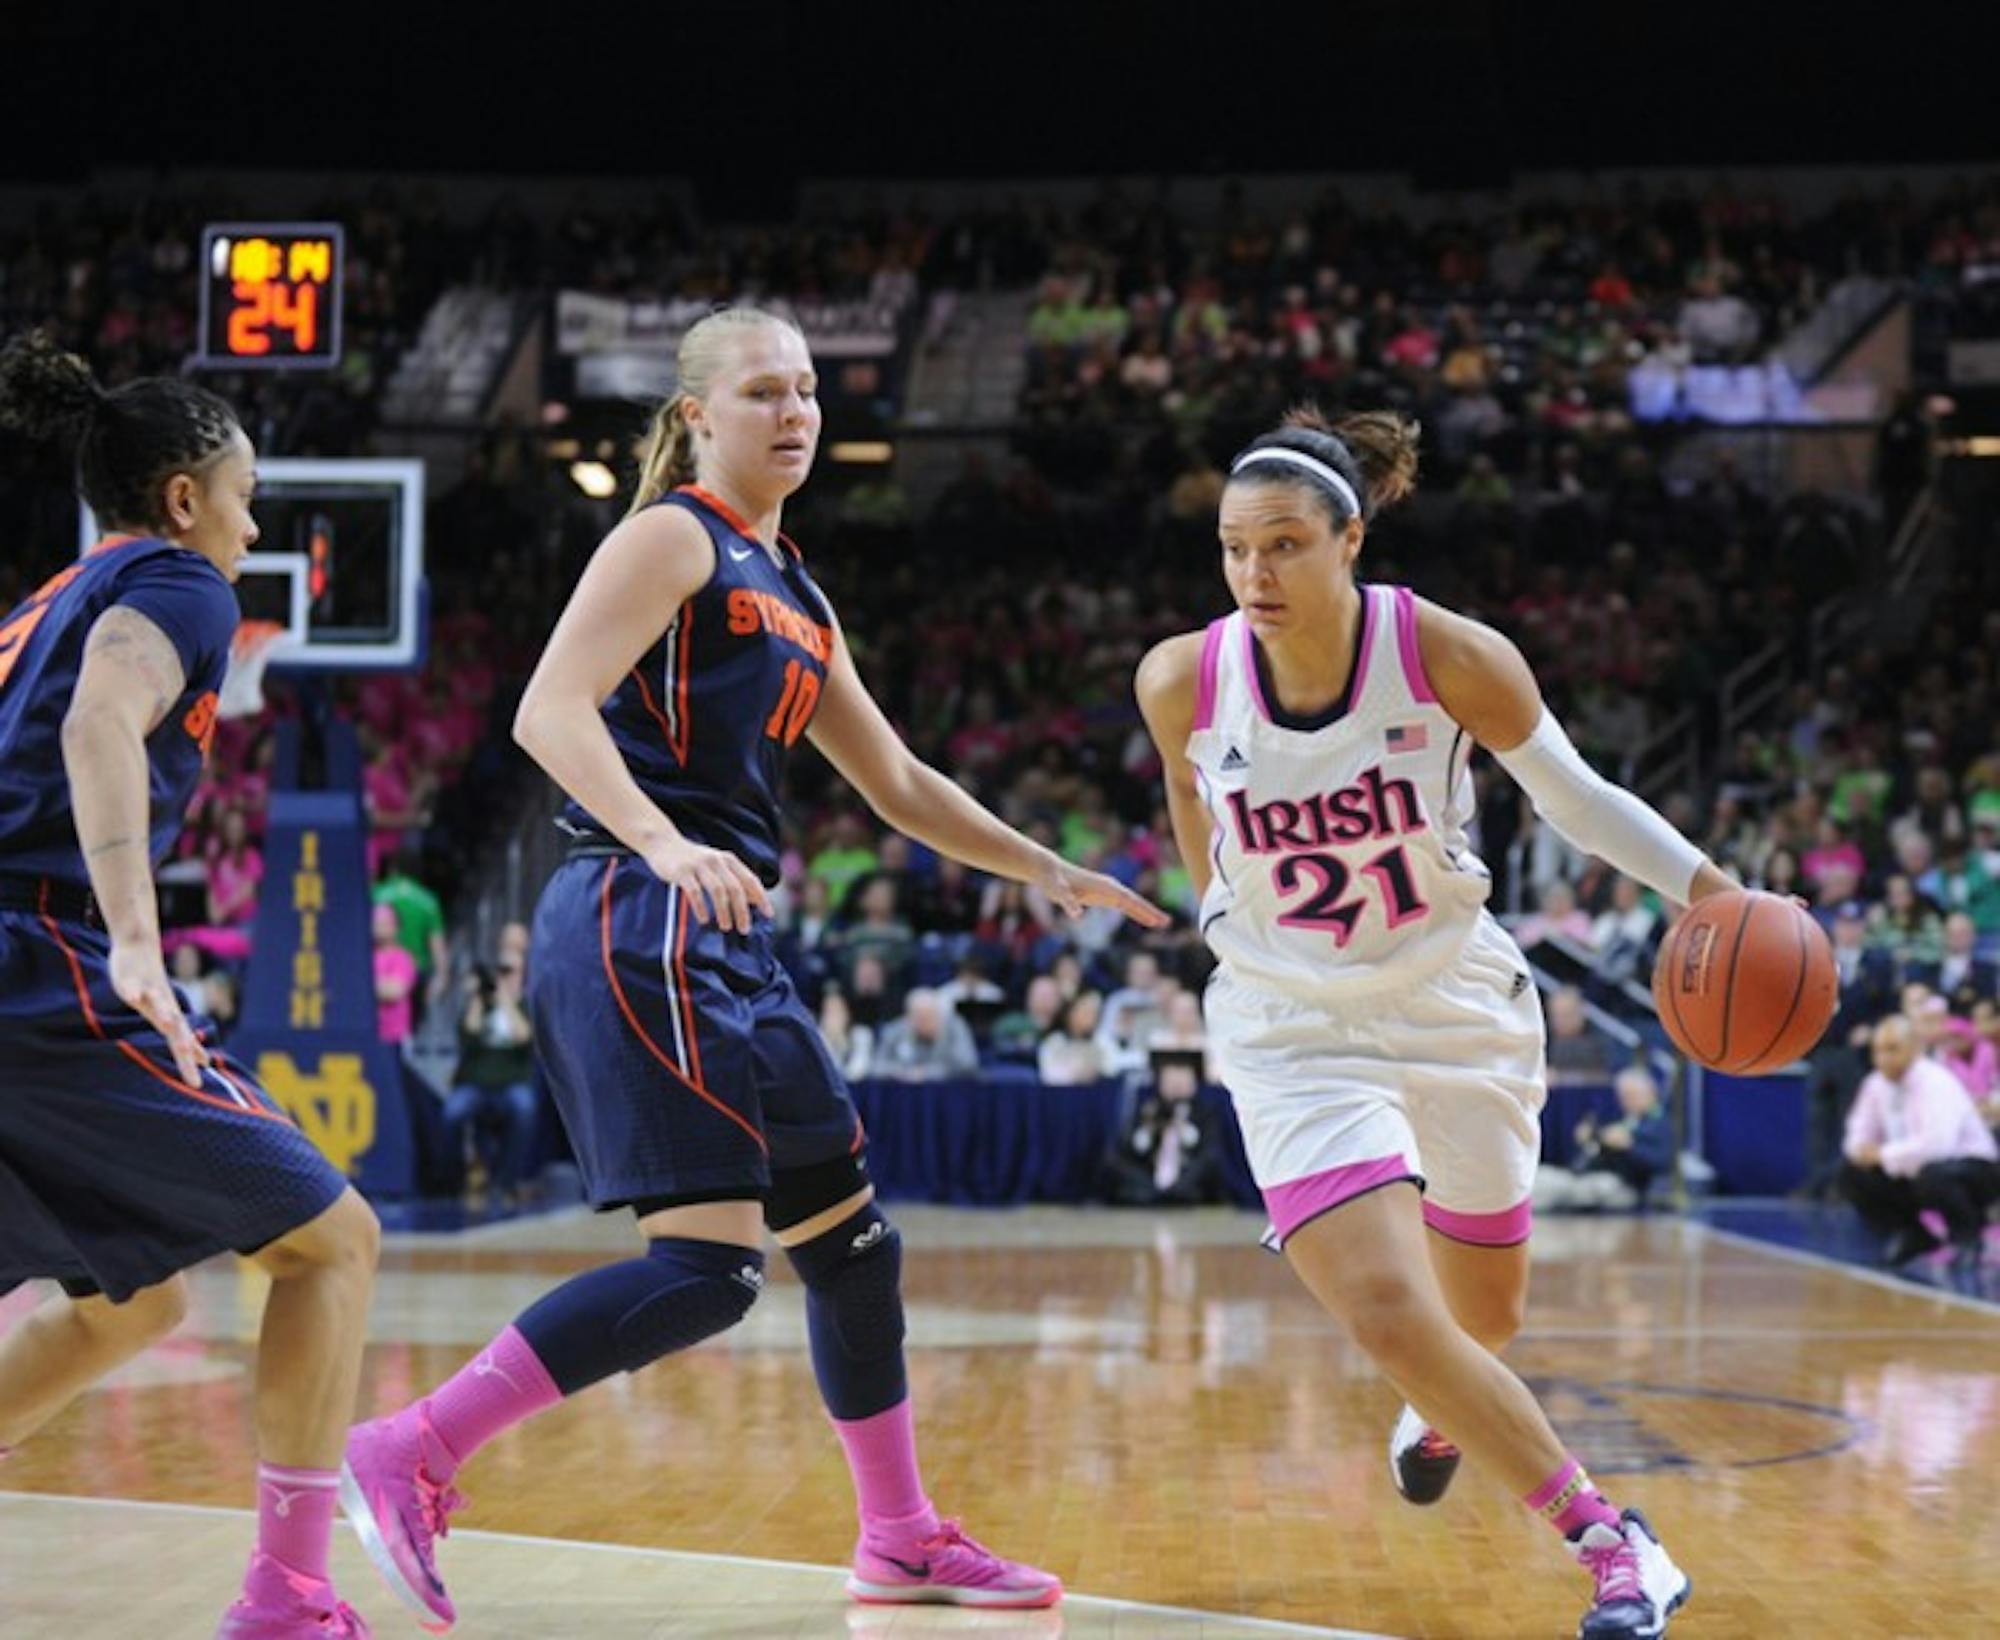 Irish senior guard Kayla McBride drives to the basket during Notre Dame’s 101-64 win over Syracuse on Feb. 9.